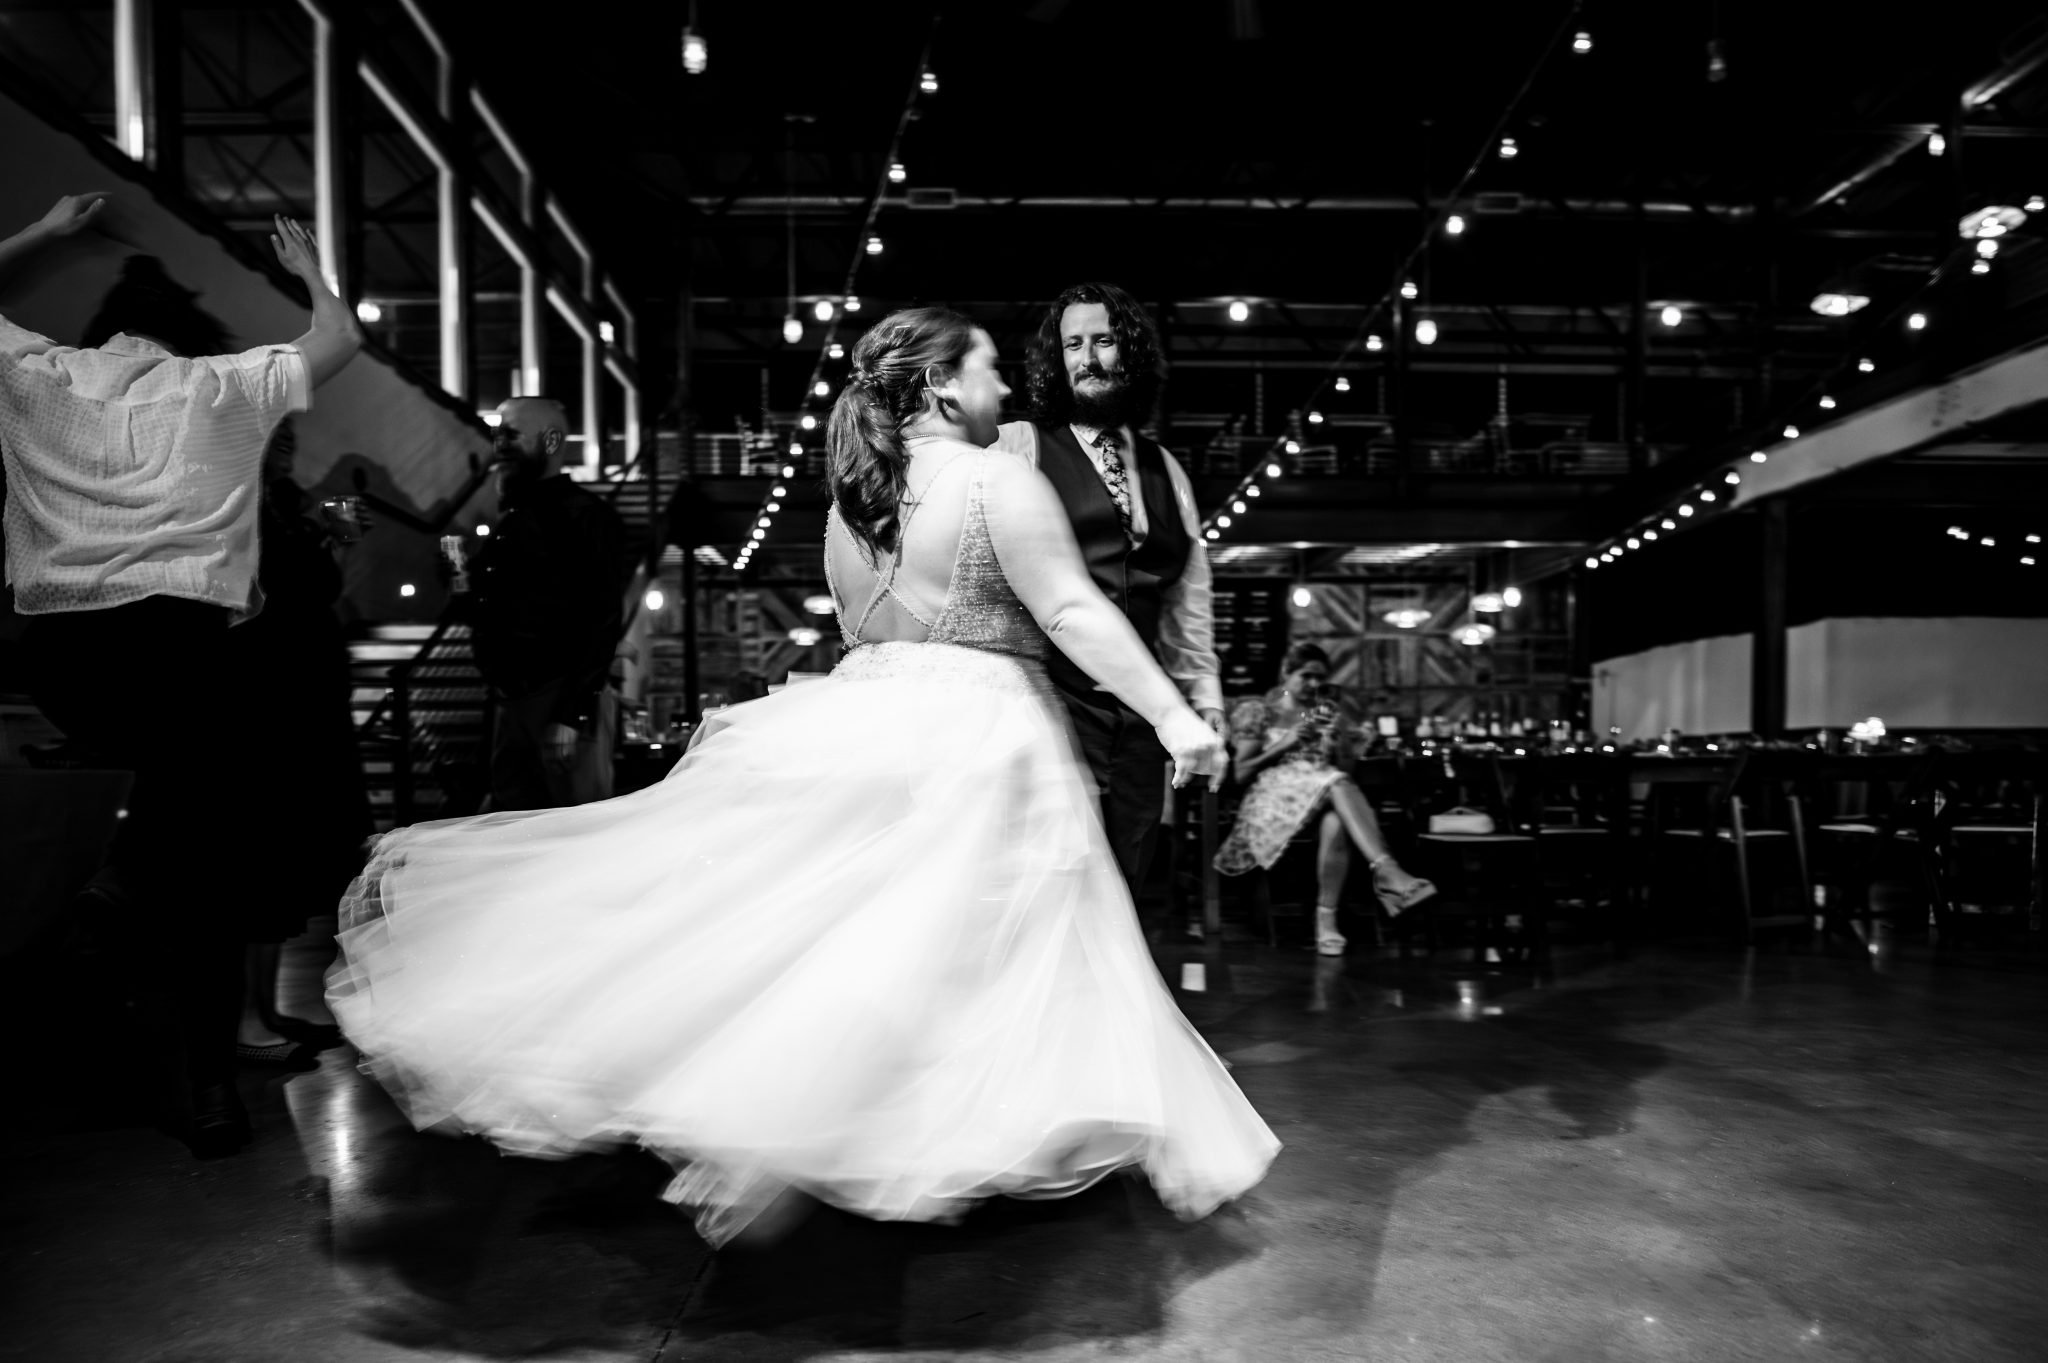 A bride and groom dancing at a highland brewing wedding reception.